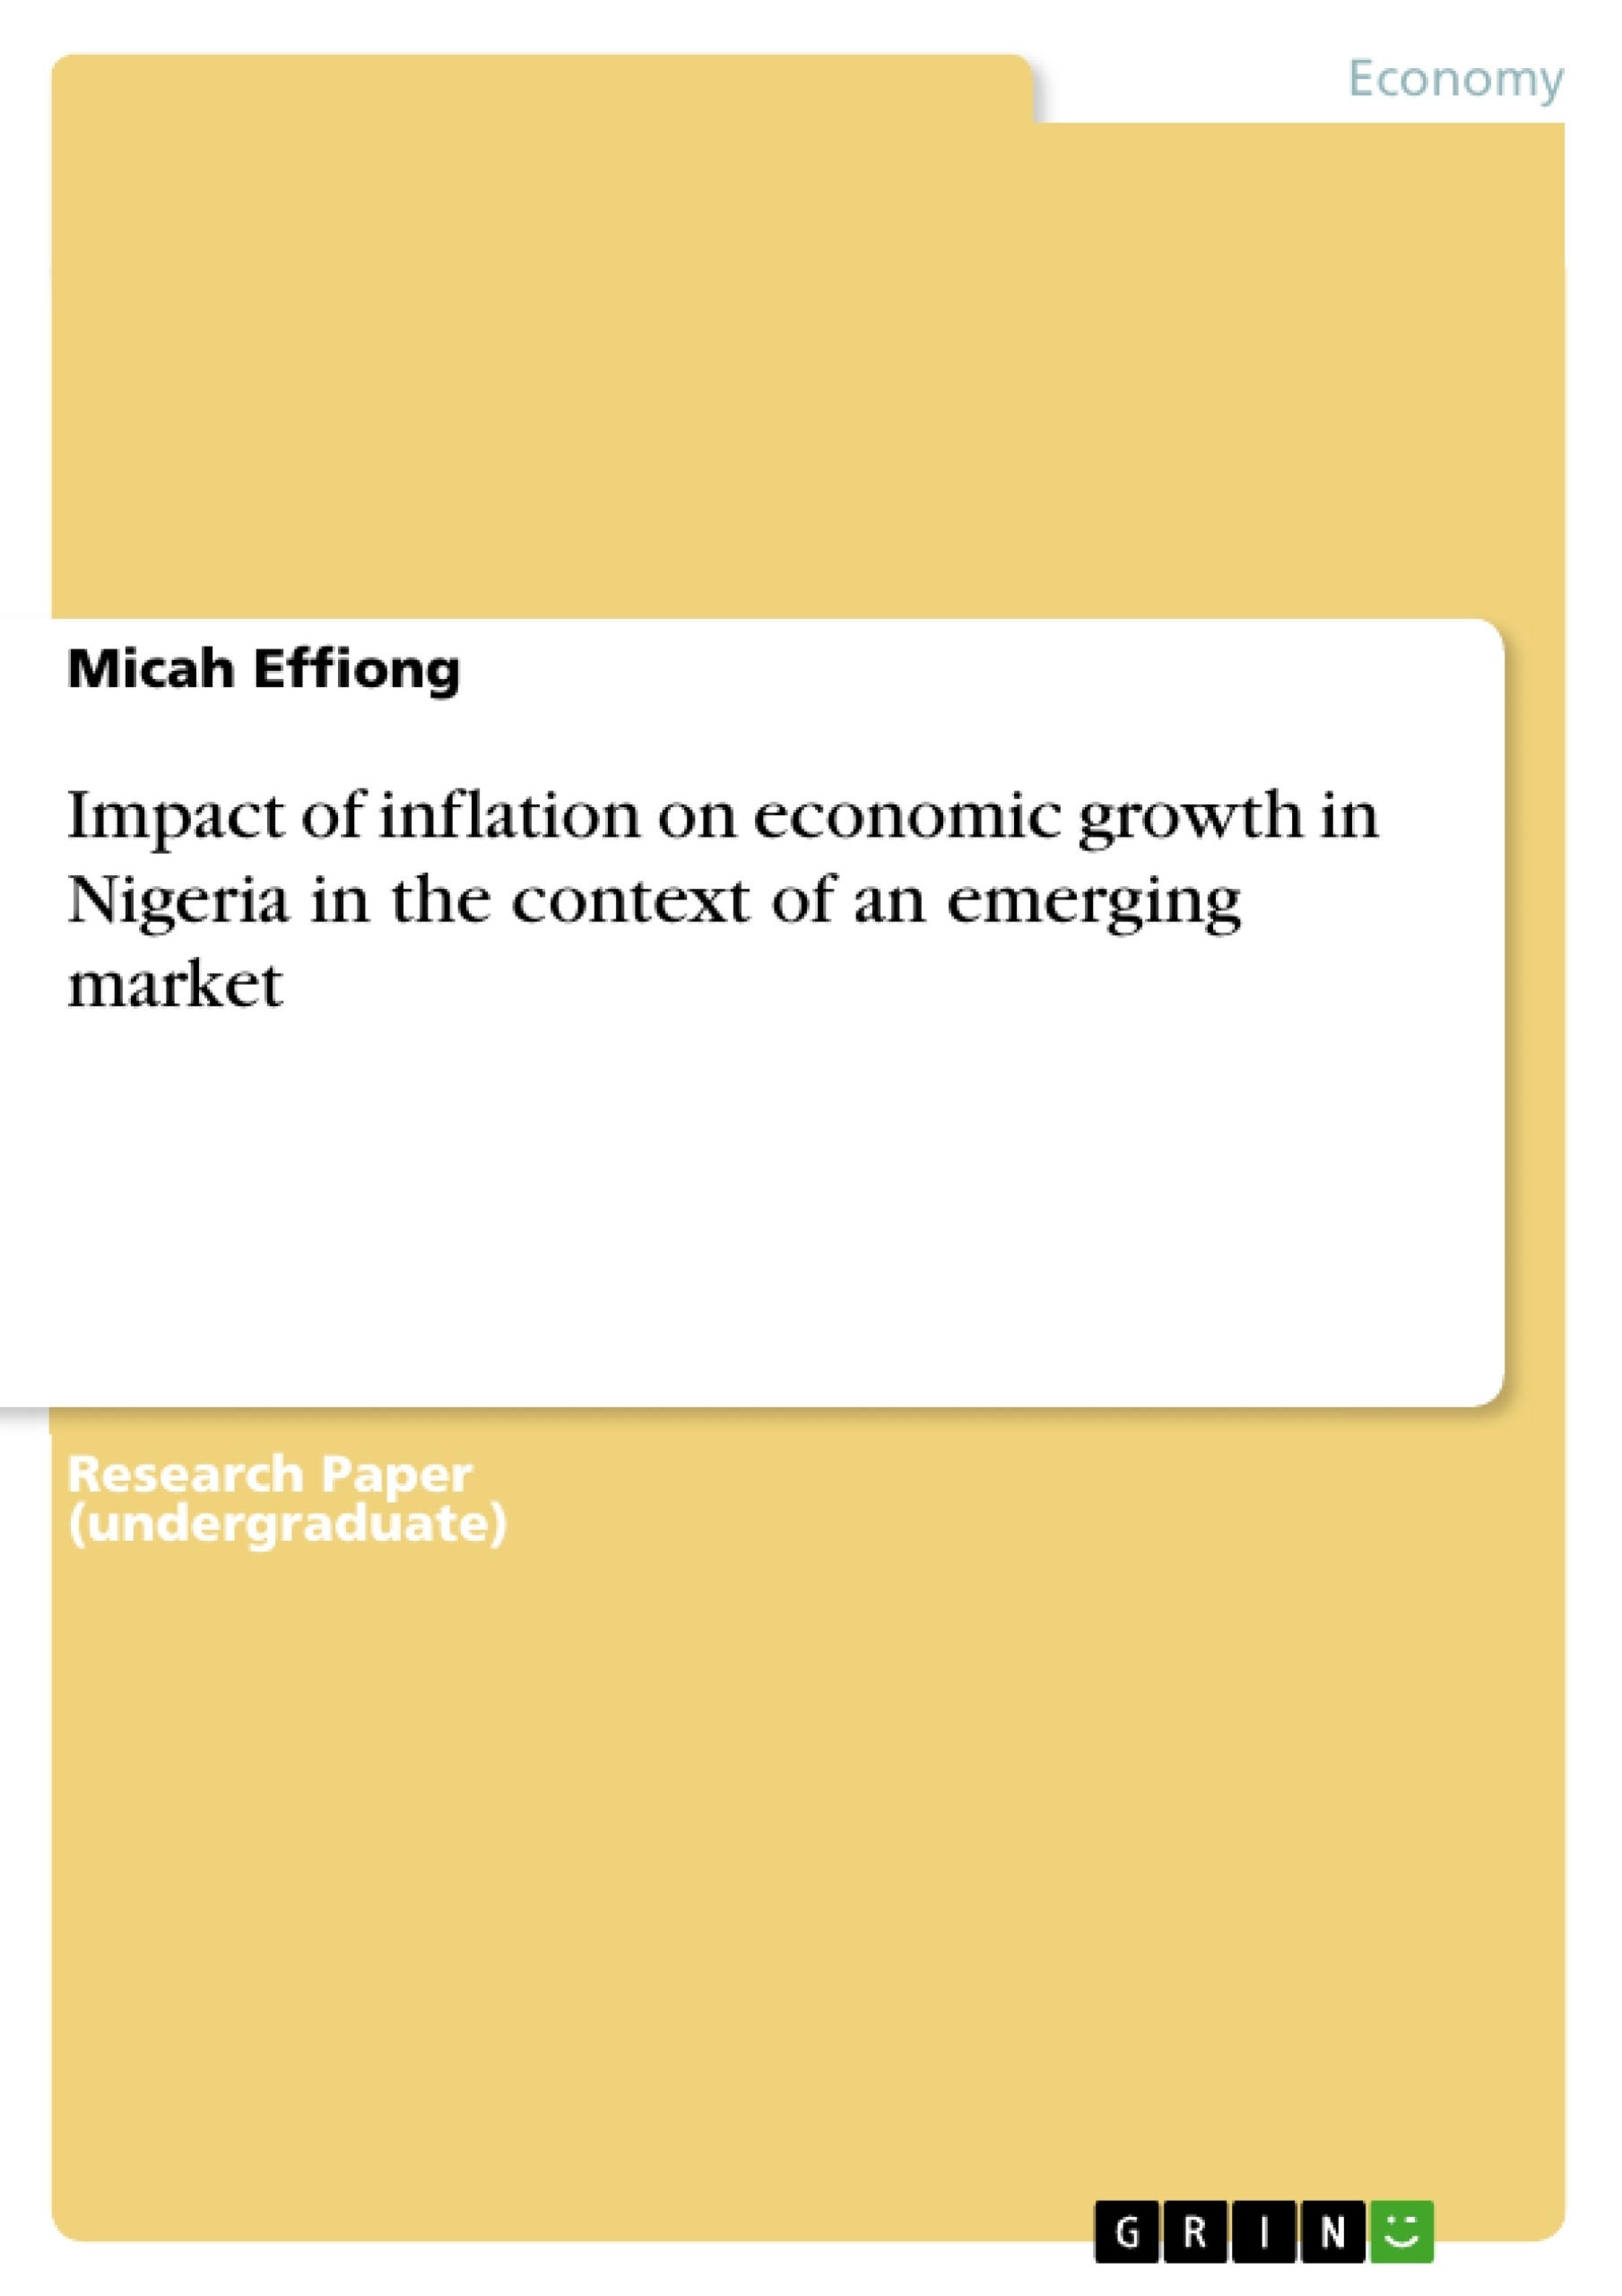 Título: Impact of inflation on economic growth in Nigeria in the context of an emerging market